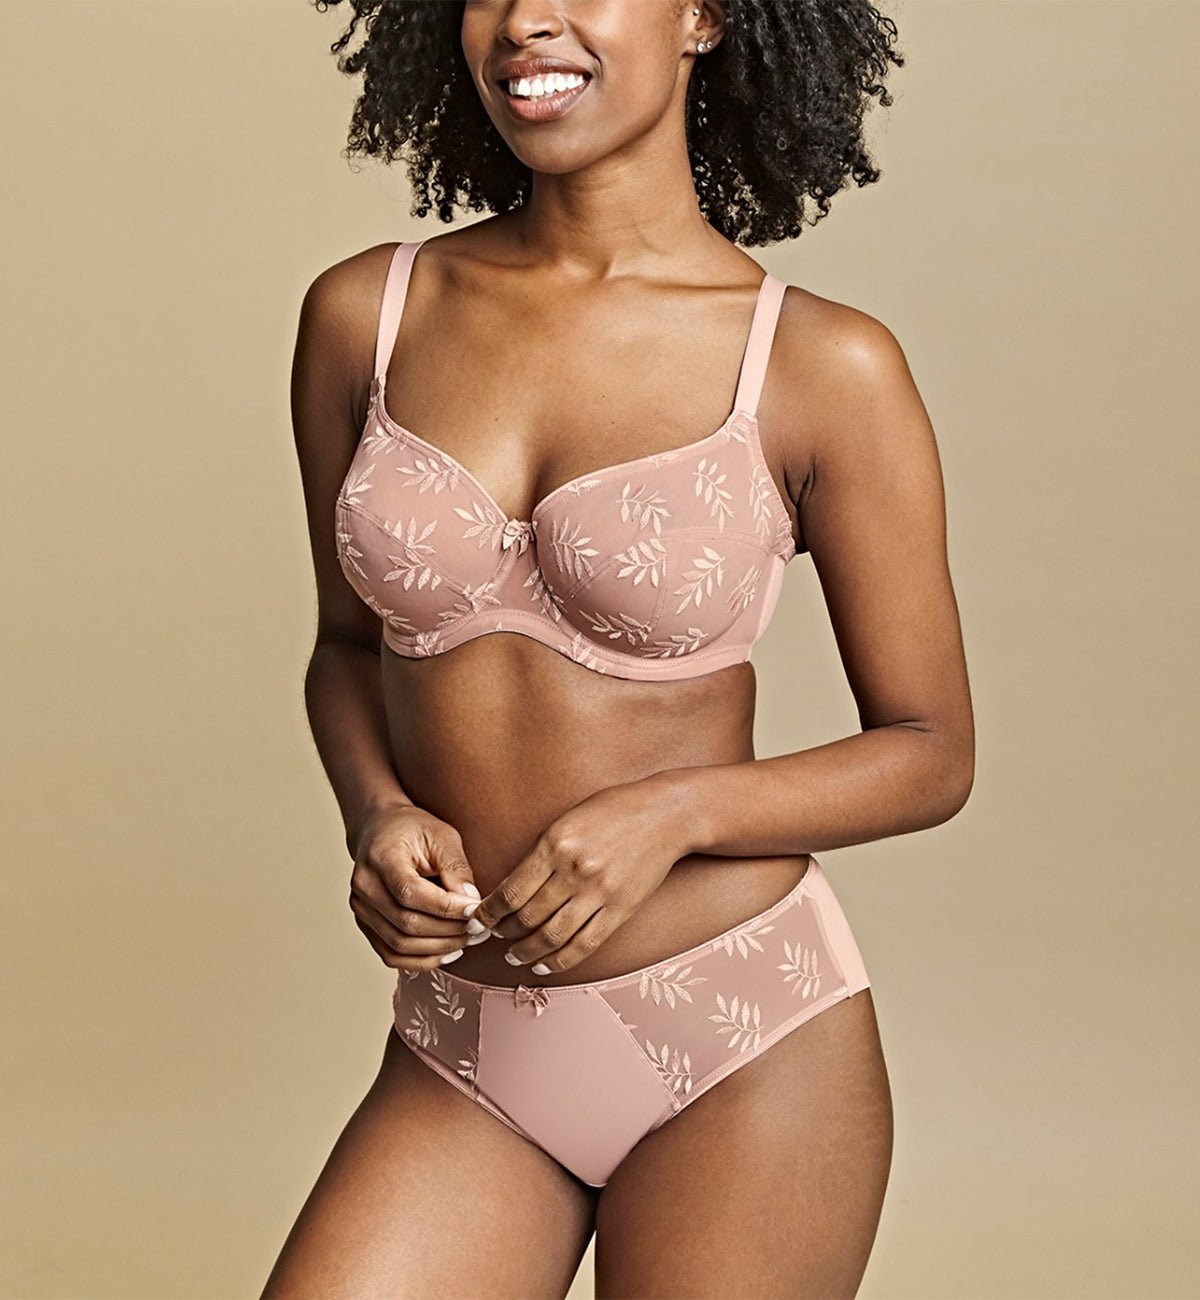 Panache Tango Matching Brief (9073),Small,Rose Dust - Rose Dust,Small